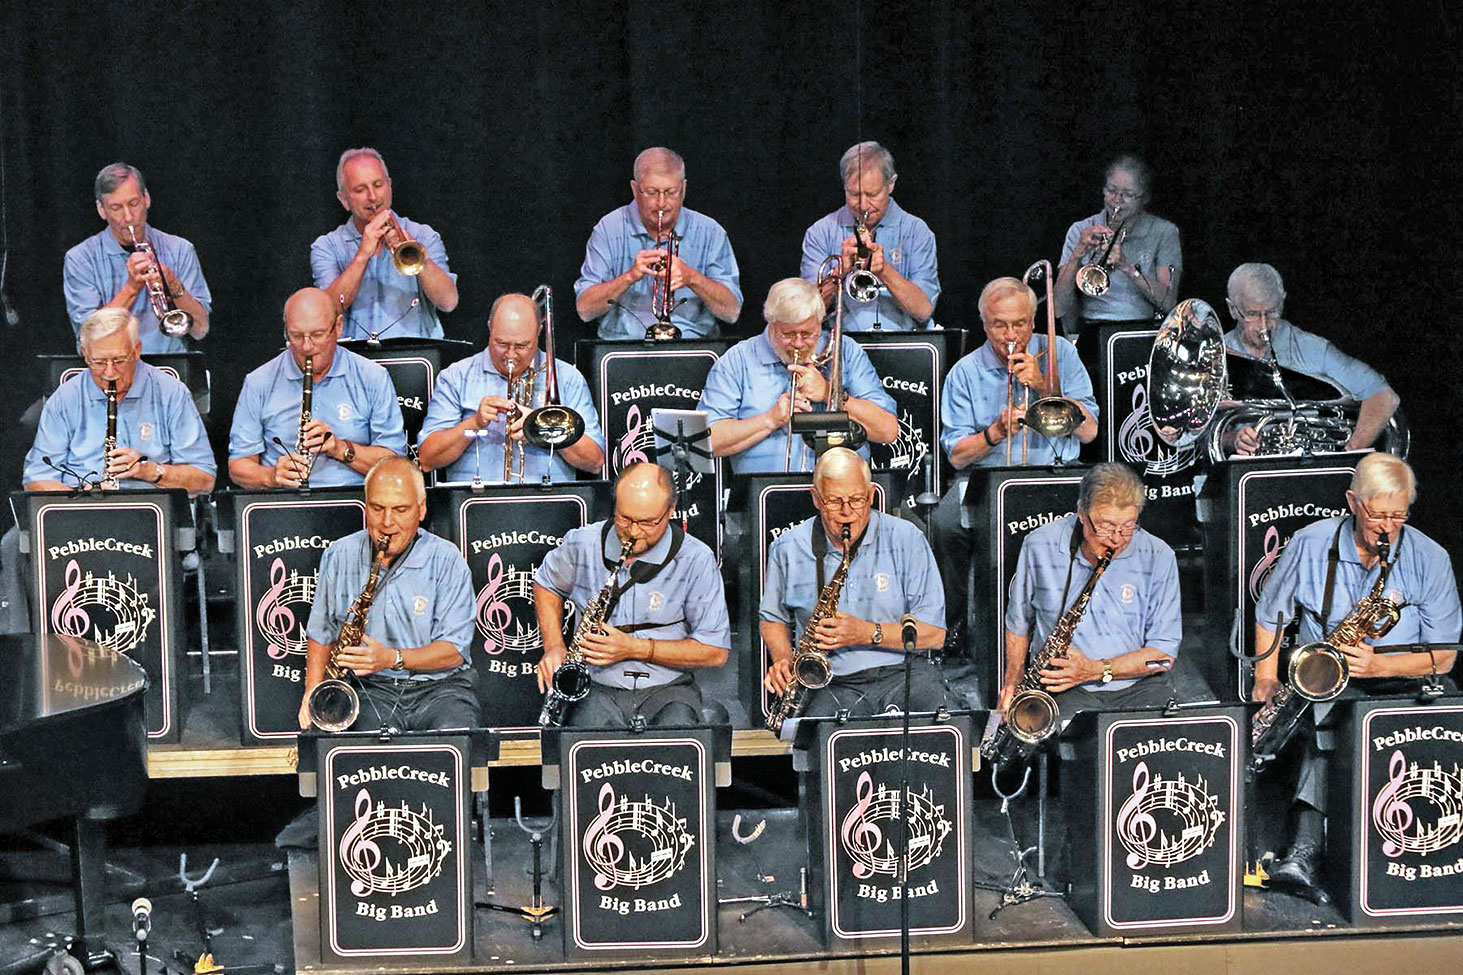 Part of the PebbleCreek Big Band in performance at last year’s Burst of Music IX